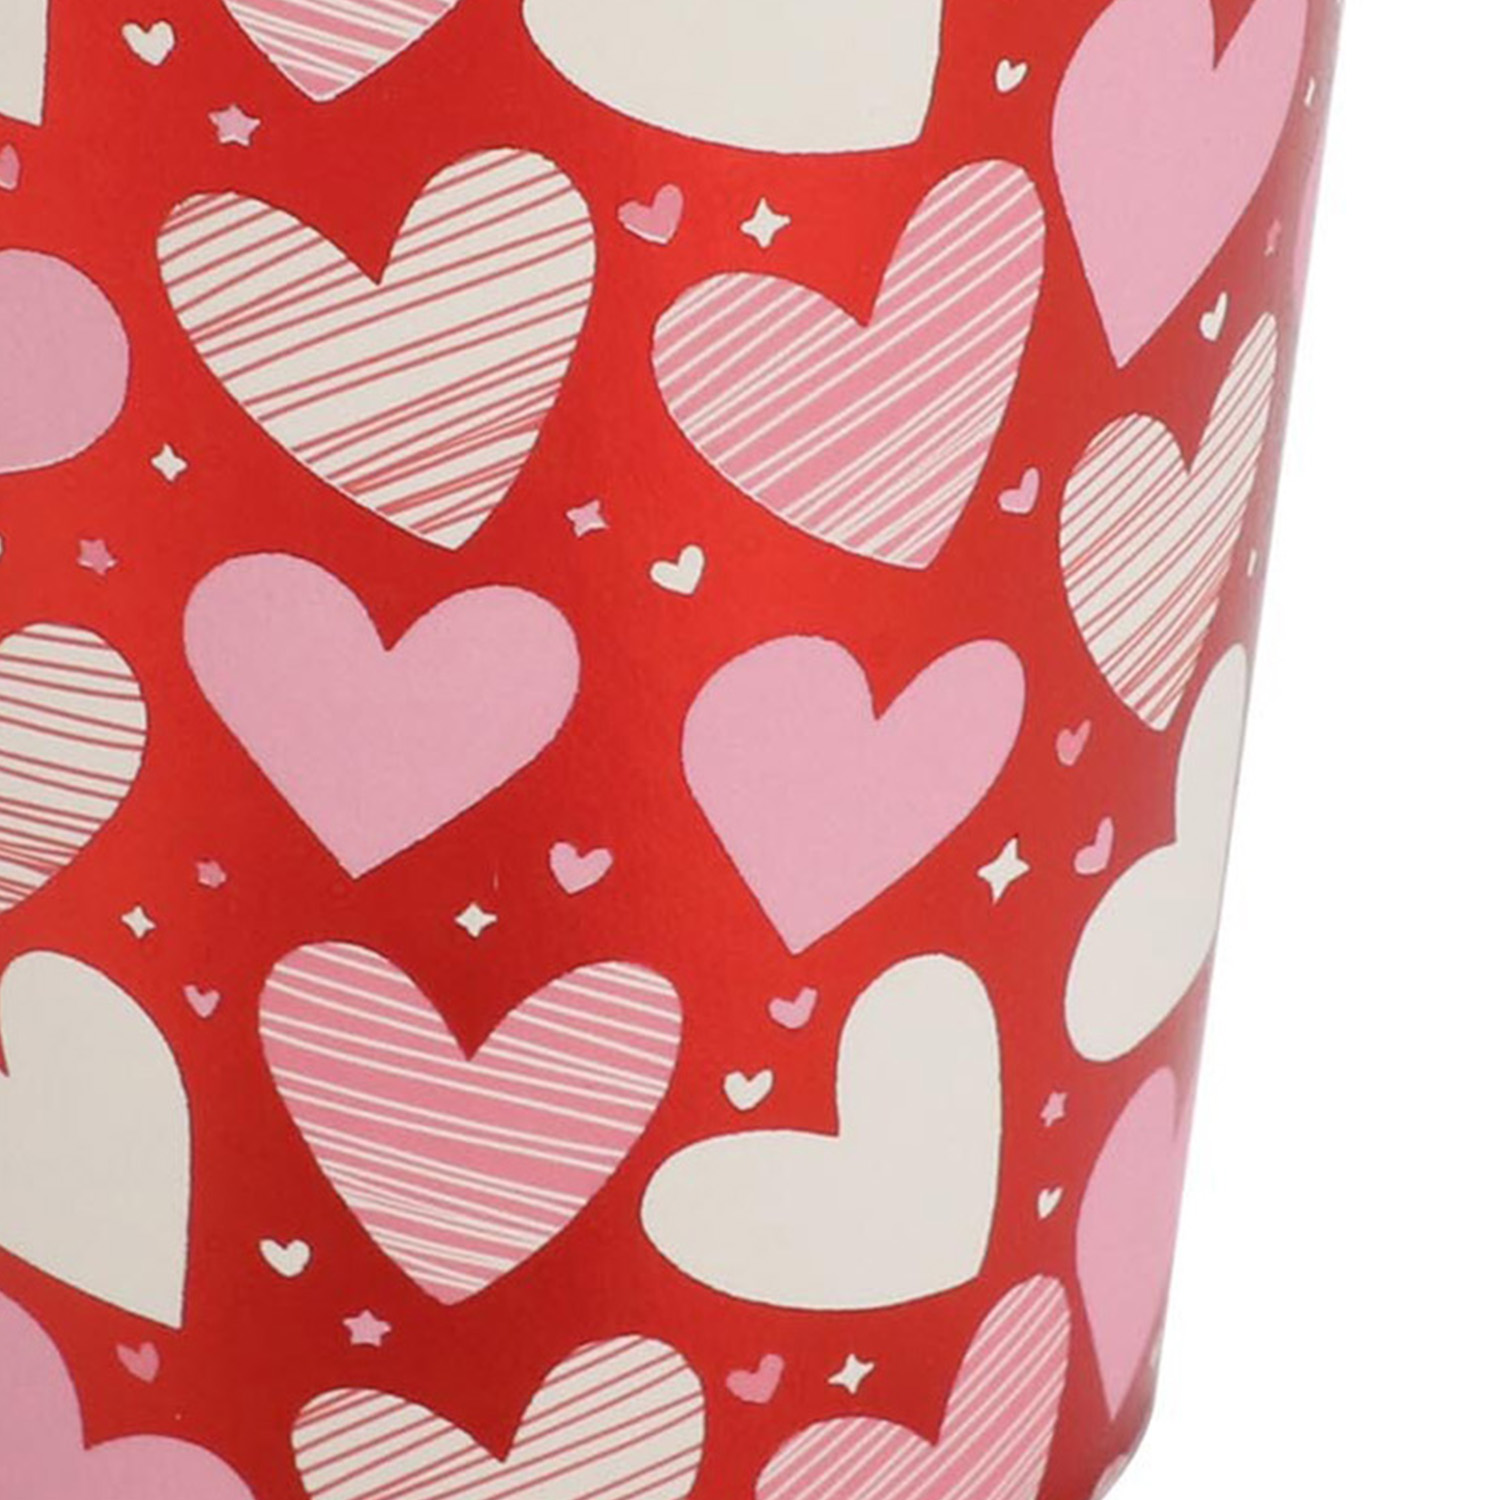 Pack of 8 Heart Paper Cups - Red Image 3